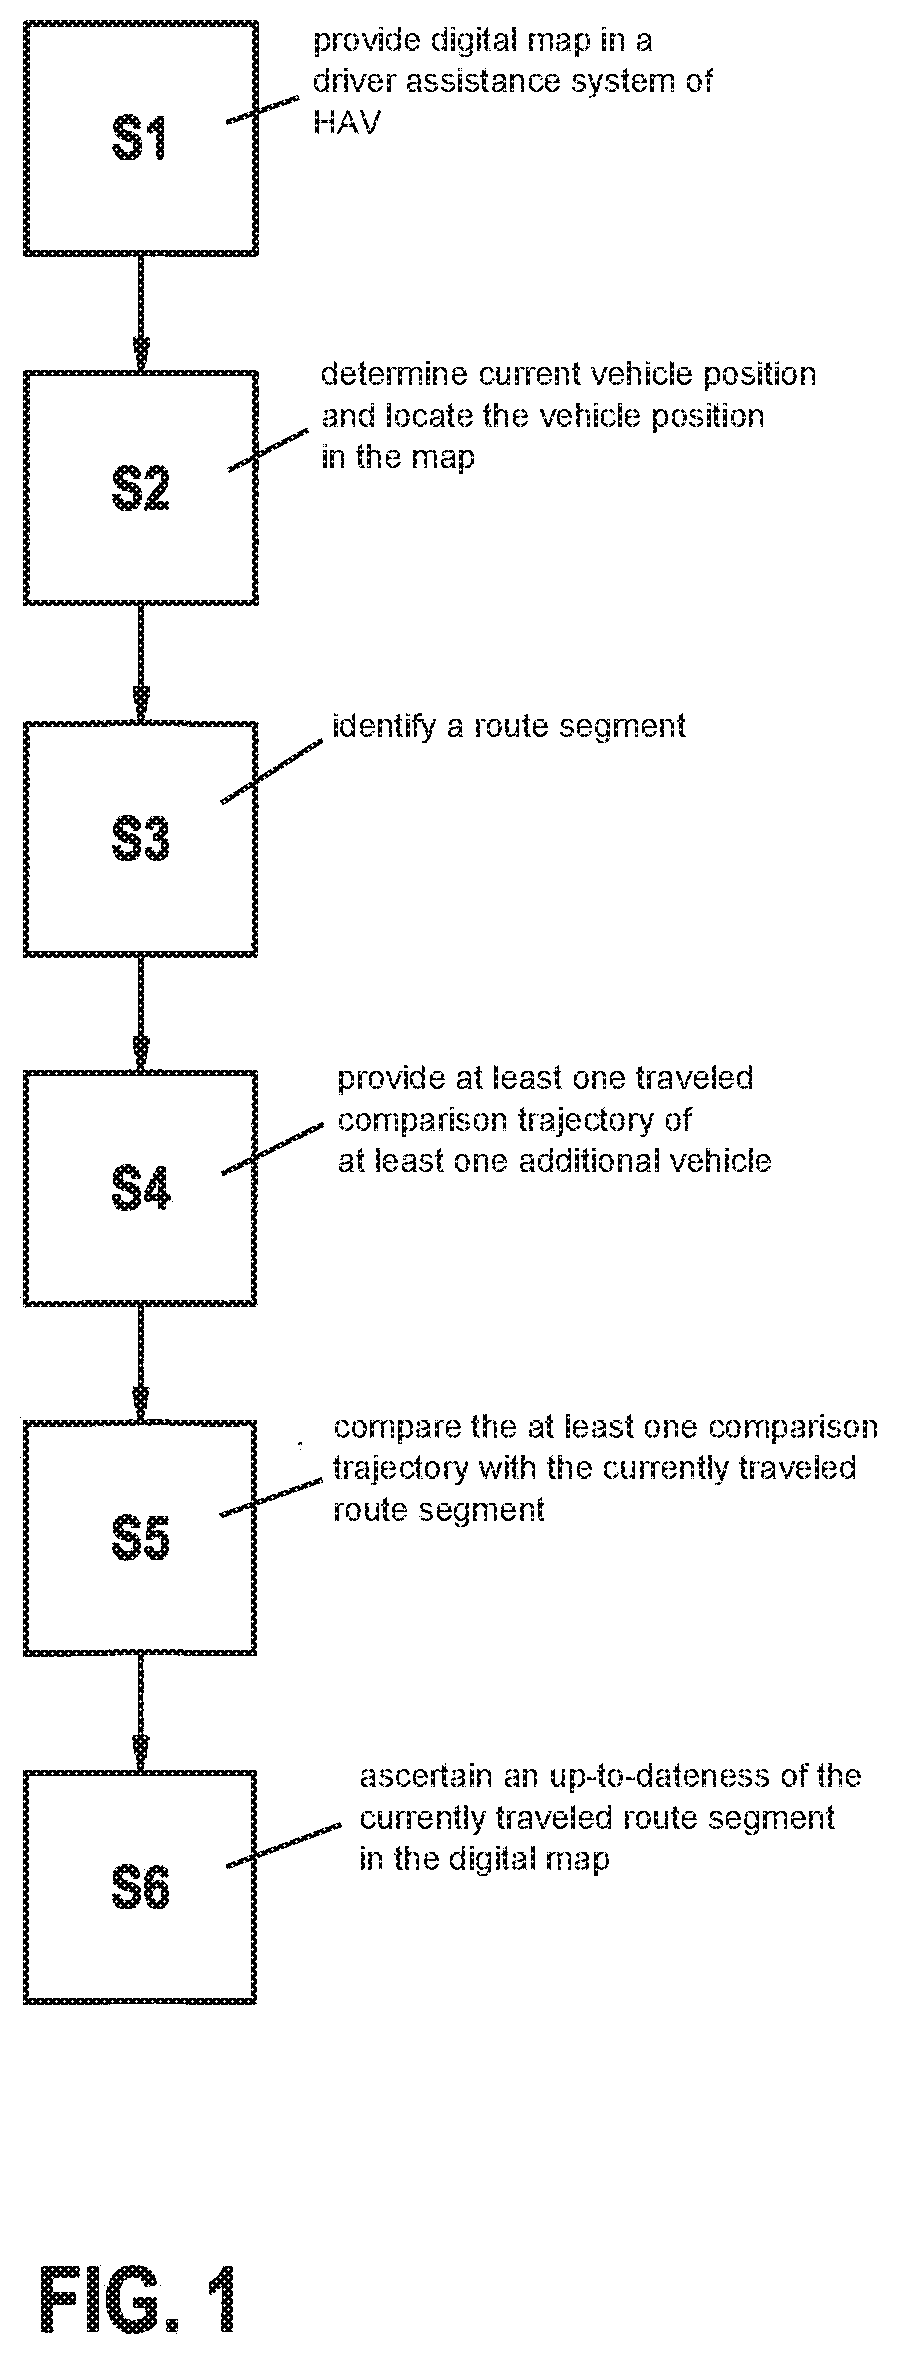 Method for operating a more highly automated vehicle (HAV), in particular a highly automated vehicle